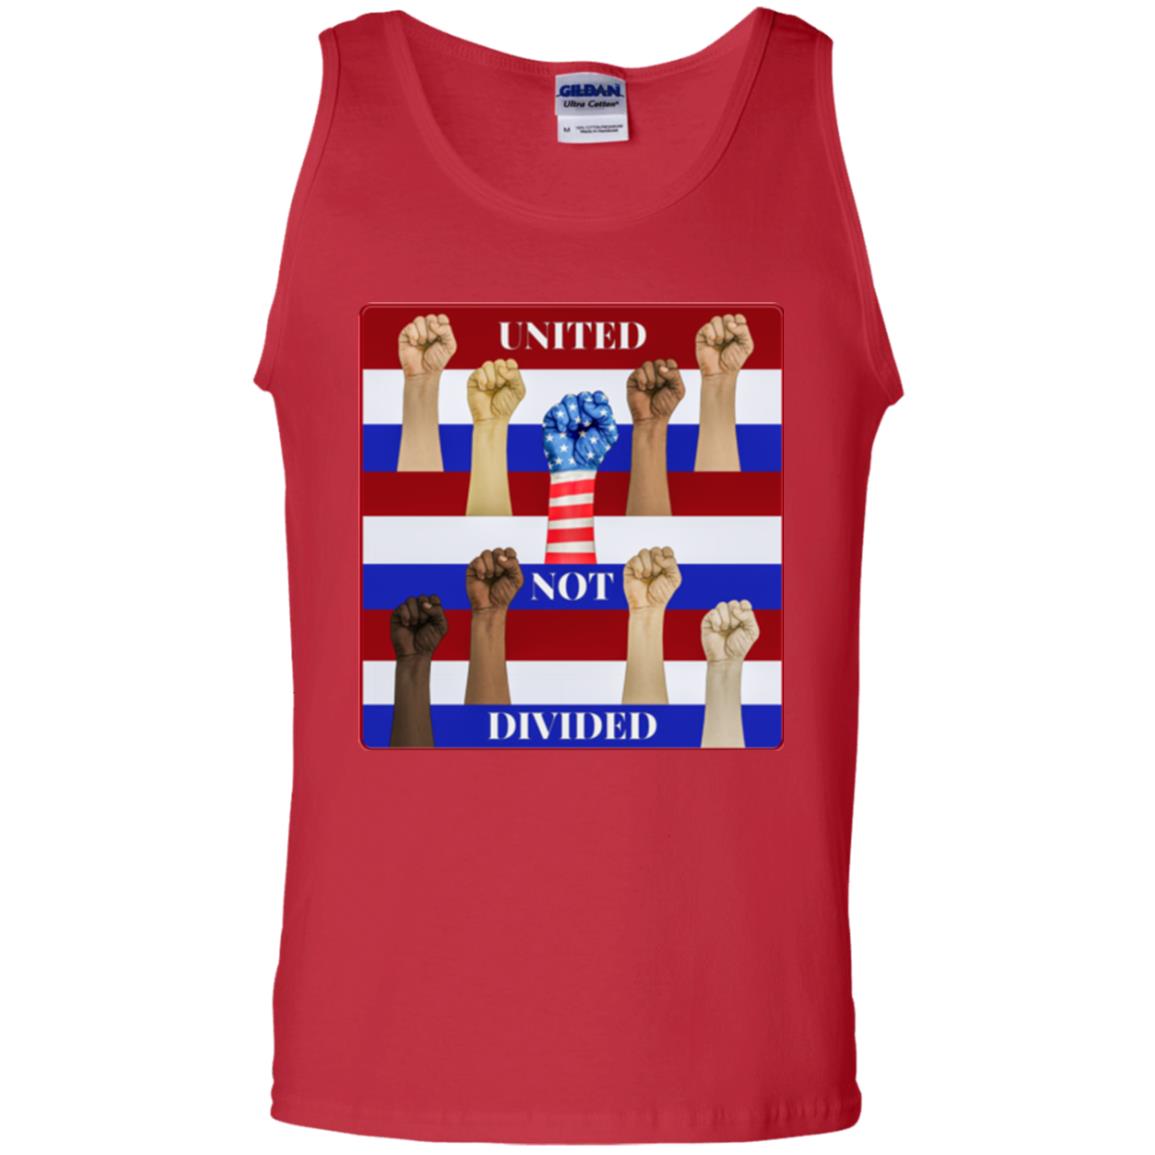 united not divided - Men's Tank Top